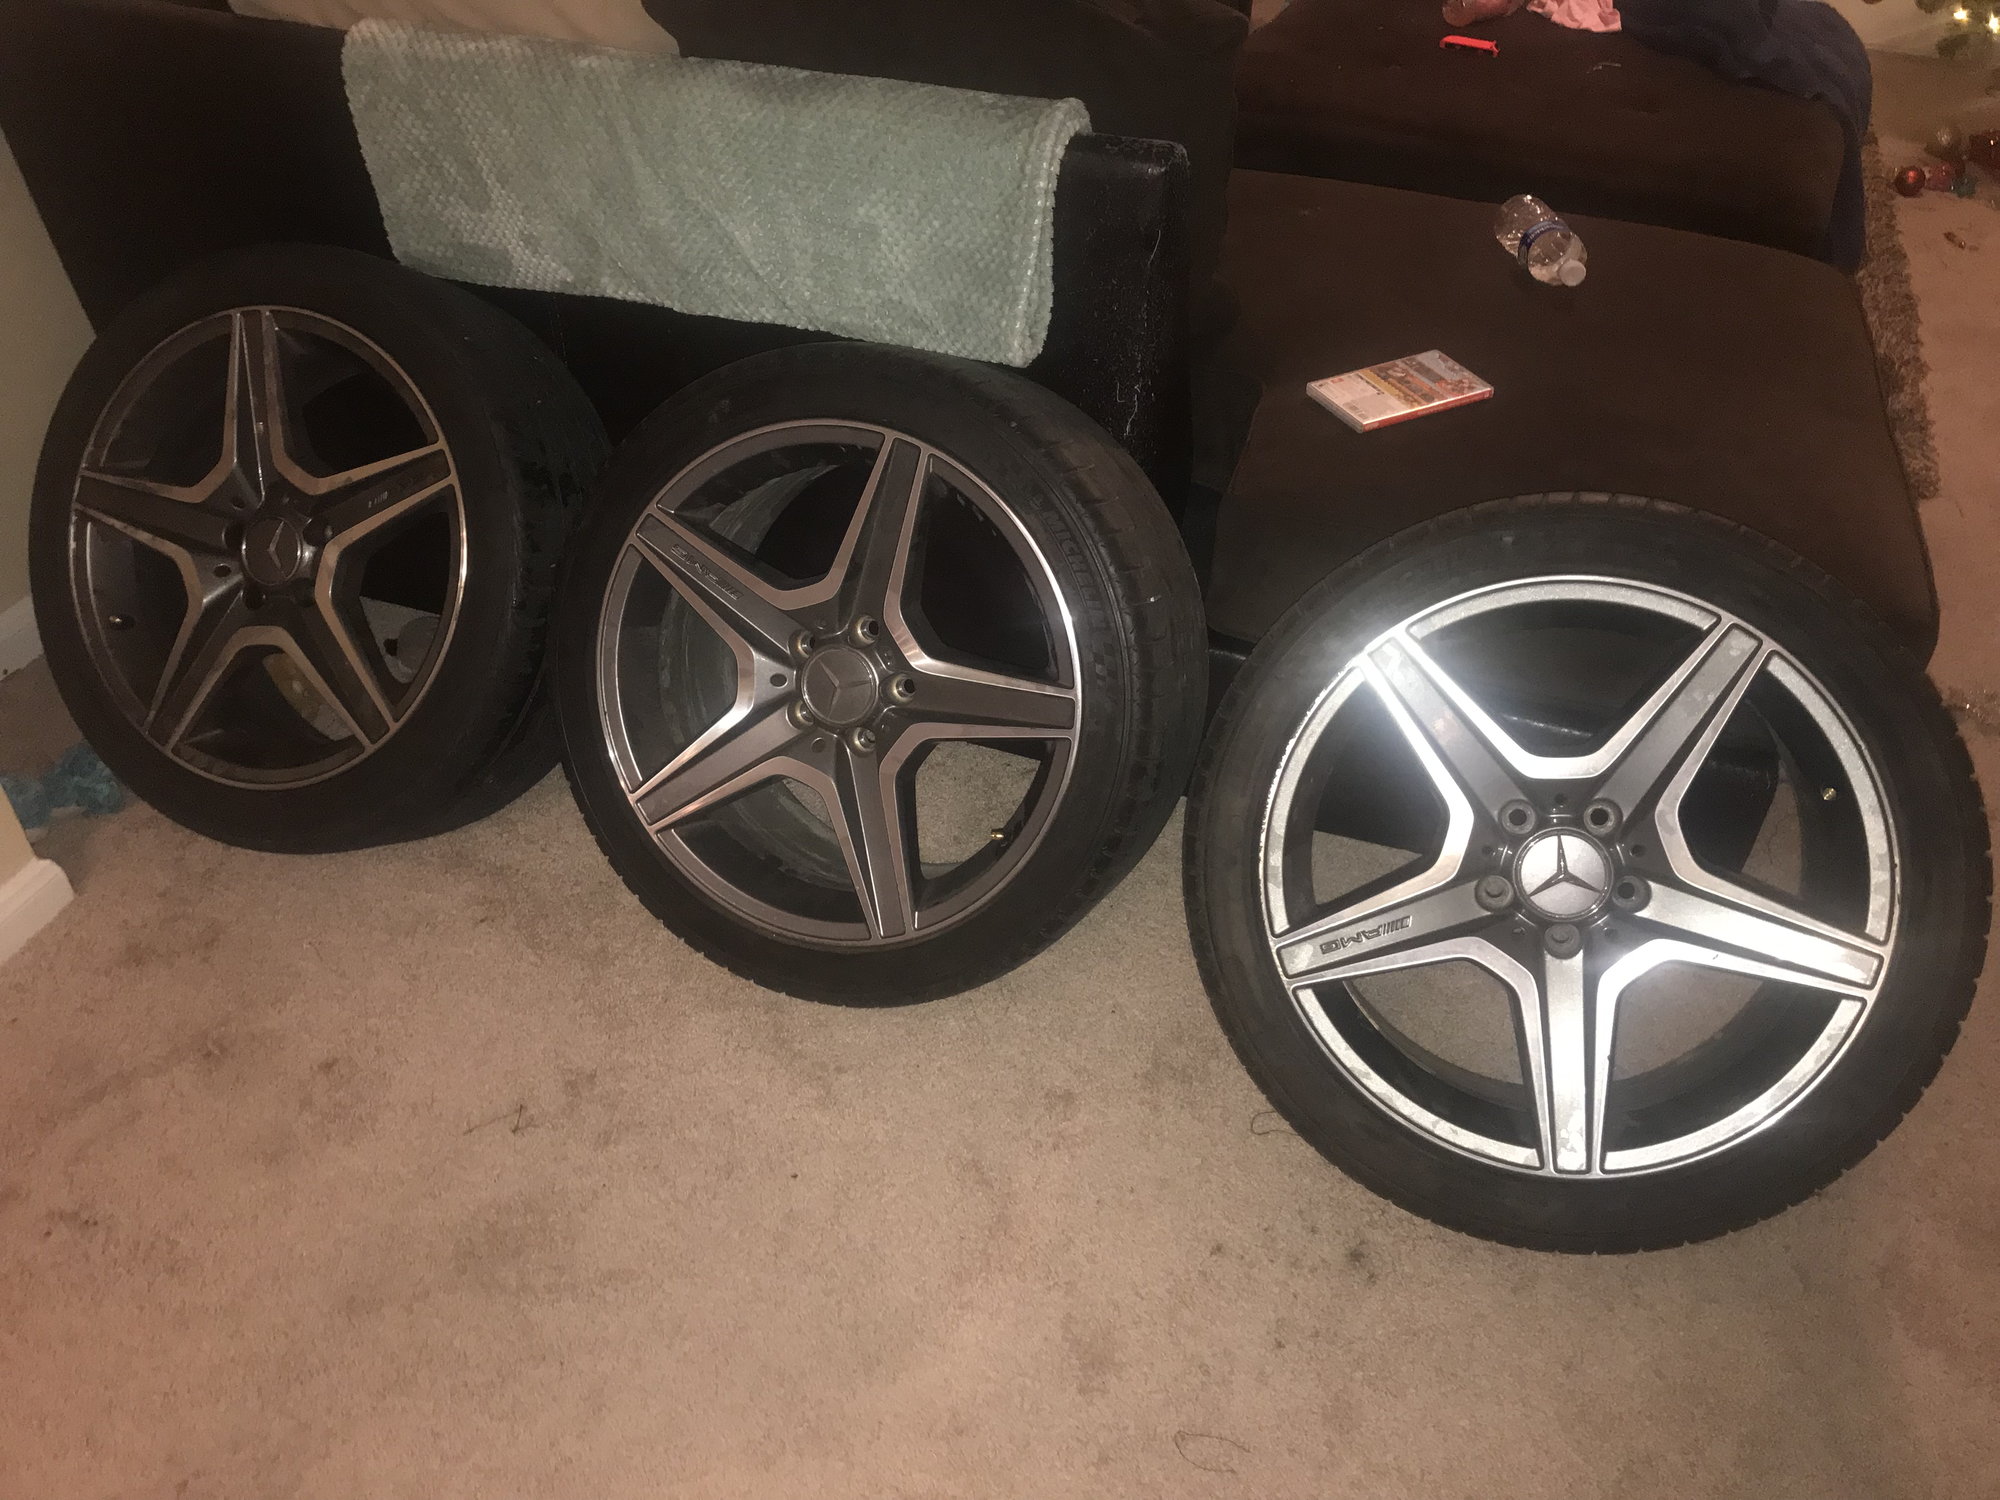 Wheels and Tires/Axles - 3 original AMG rims/tires - Used - 2008 to 2014 Mercedes-Benz C63 AMG - Houston, TX 77040, United States